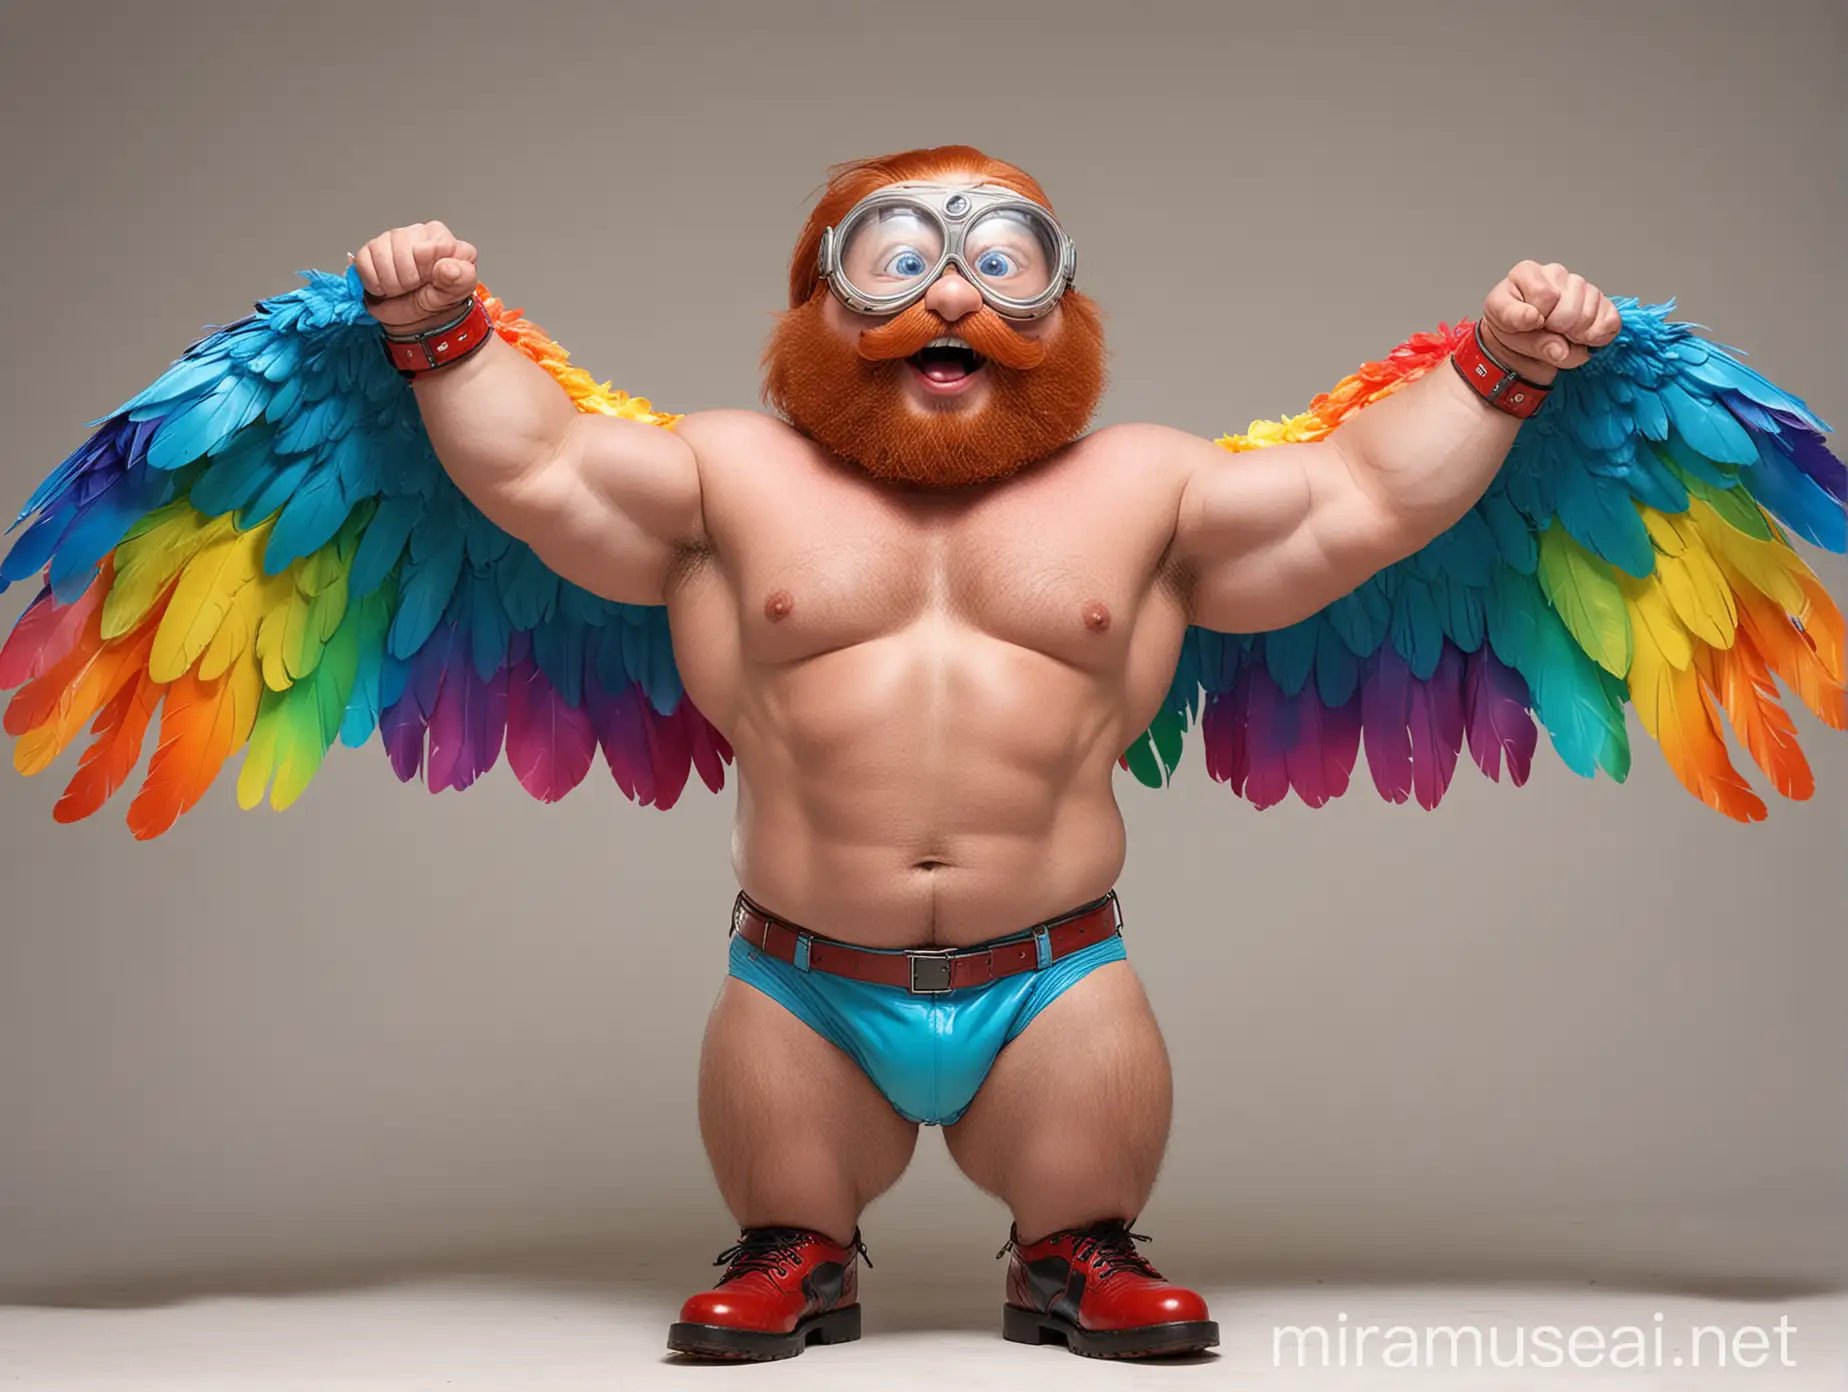 Happy Big Eyes Topless 40s Ultra Beefy Redhead Bodybuilder Daddy with Beard Wearing Multi-Highlighter Bright Rainbow Colored See Through huge Eagle Wings Shoulder Jacket short shorts low leather boots and Flexing his Big Strong Arm Up with Doraemon Goggles on forehead